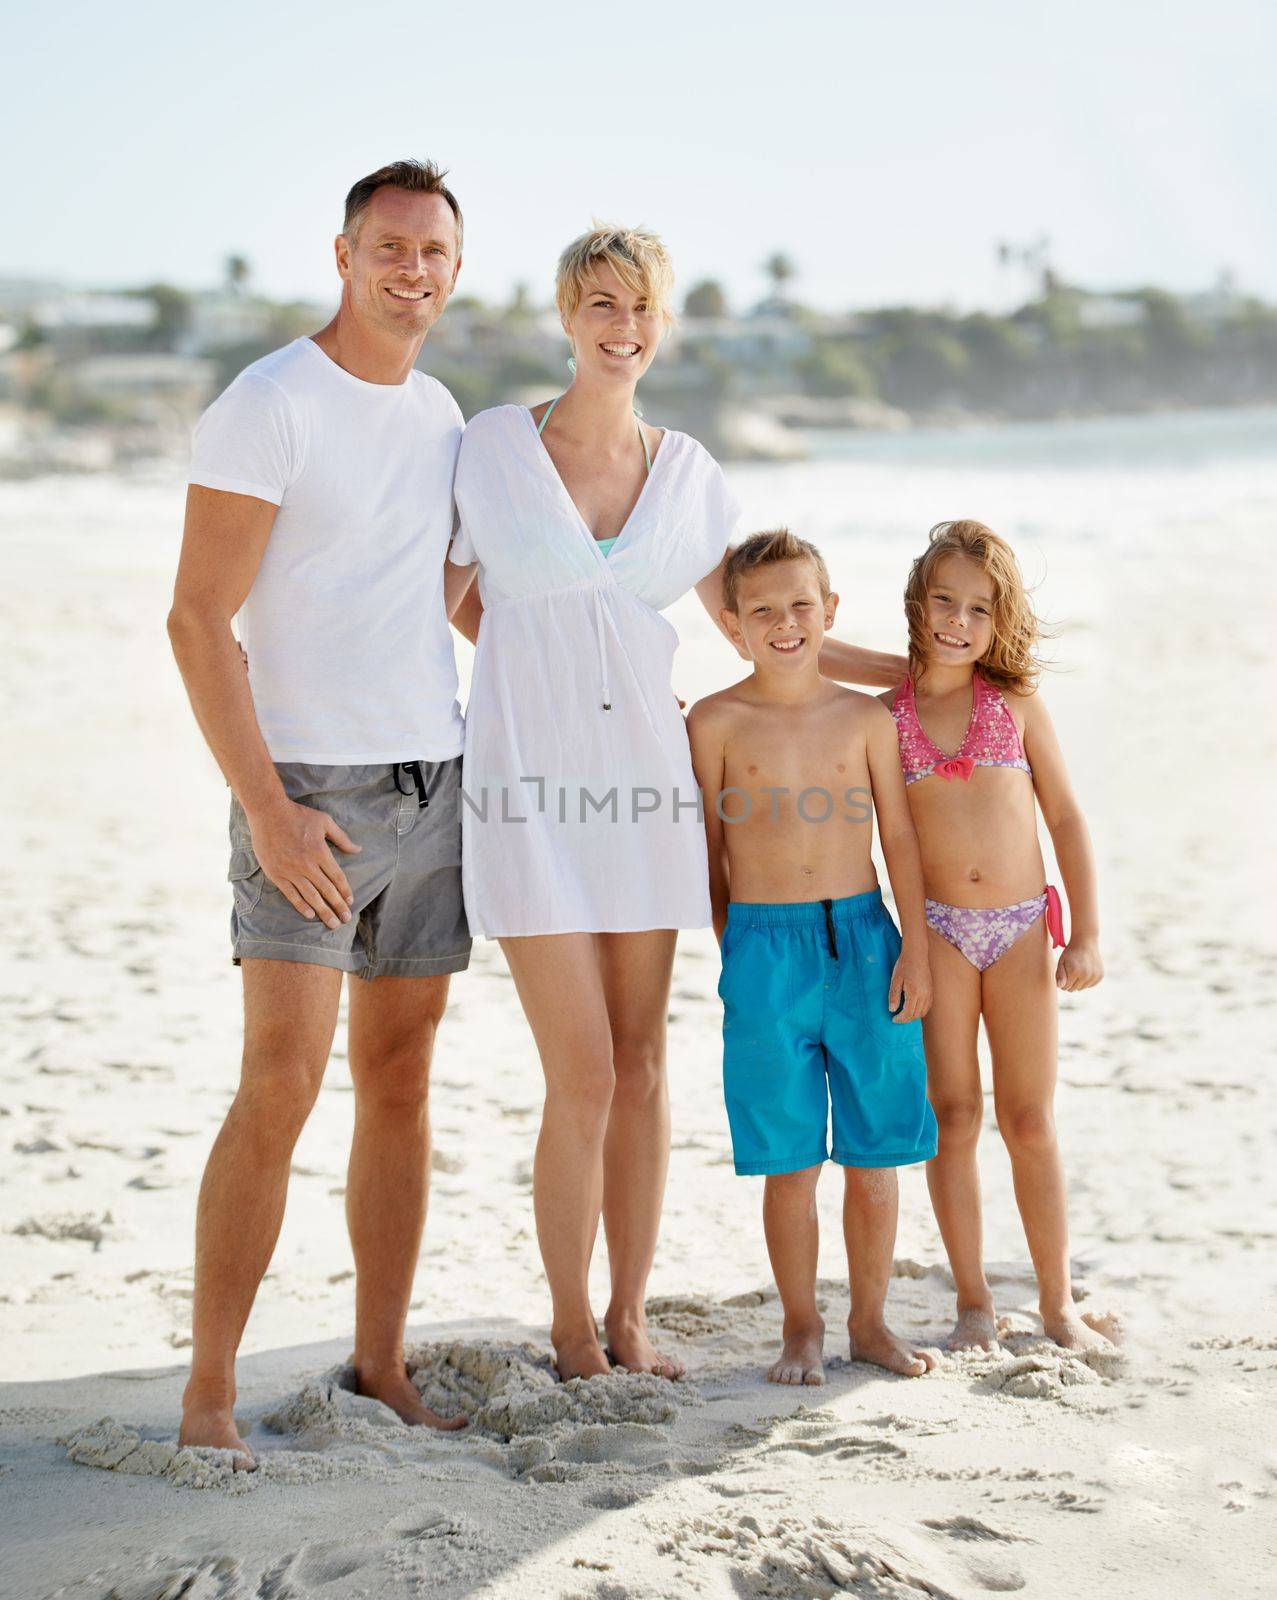 Every family deserves a great vacation. A happy young family standing on the beach while on vacation. by YuriArcurs